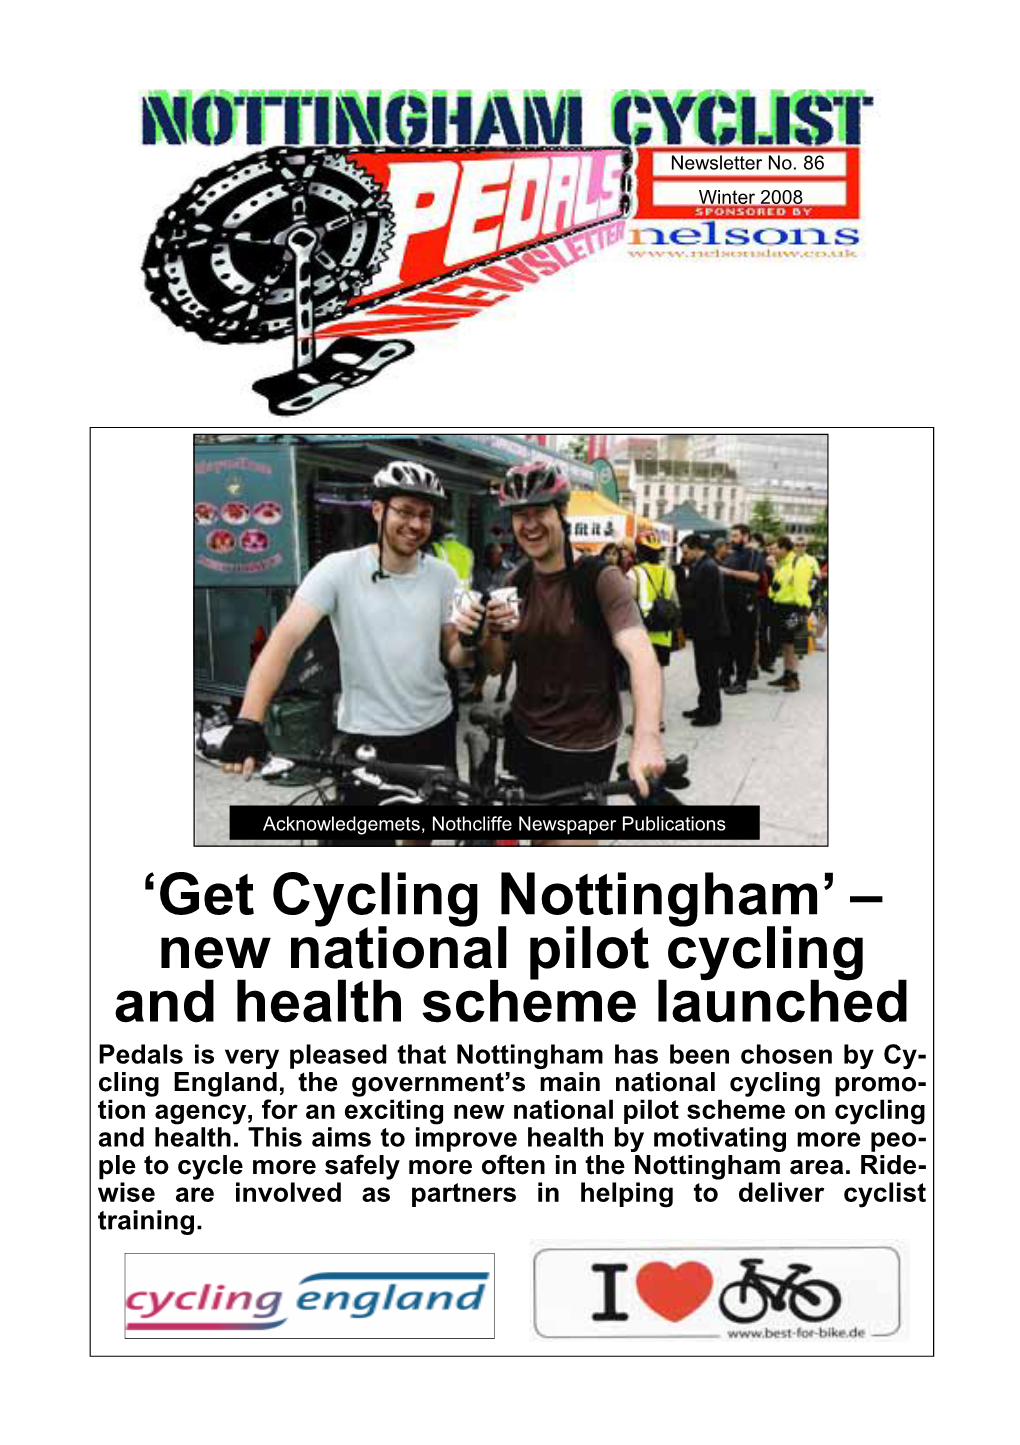 Get Cycling Nottingham’ – New National Pilot Cycling and Health Scheme Launched